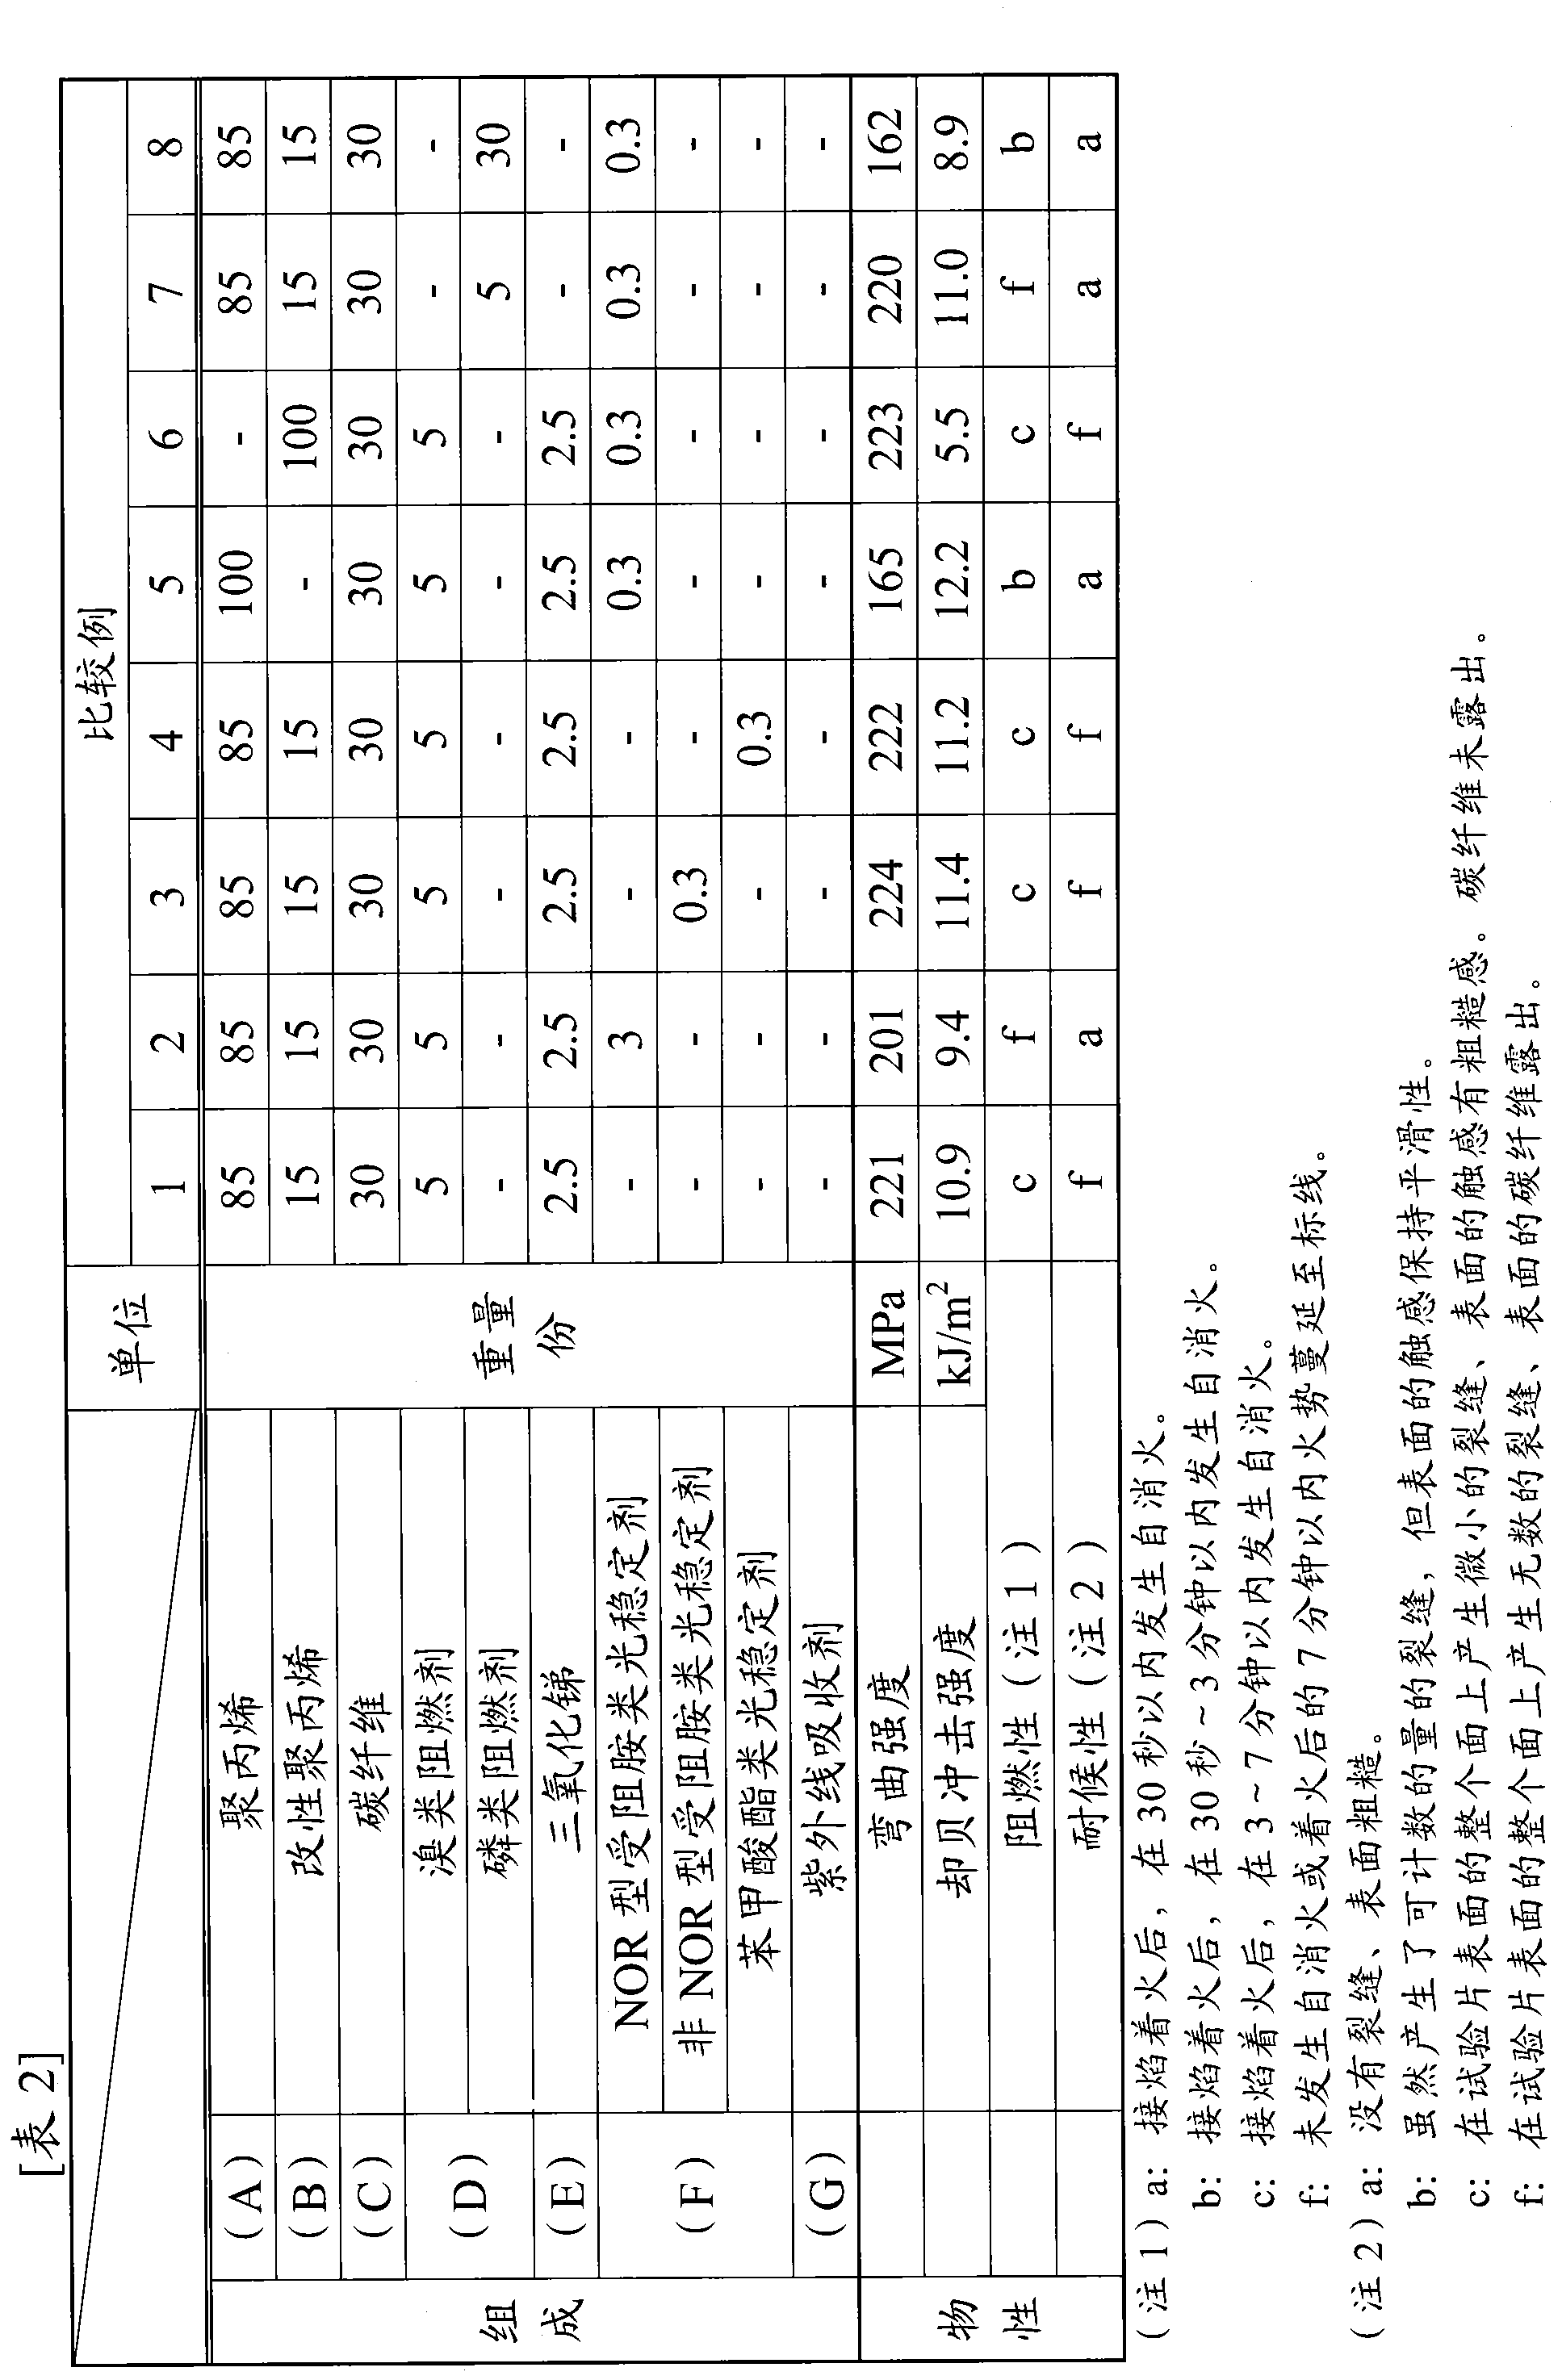 Carbon-fiber reinforced polypropylene resin composition, molding material, and molded articles